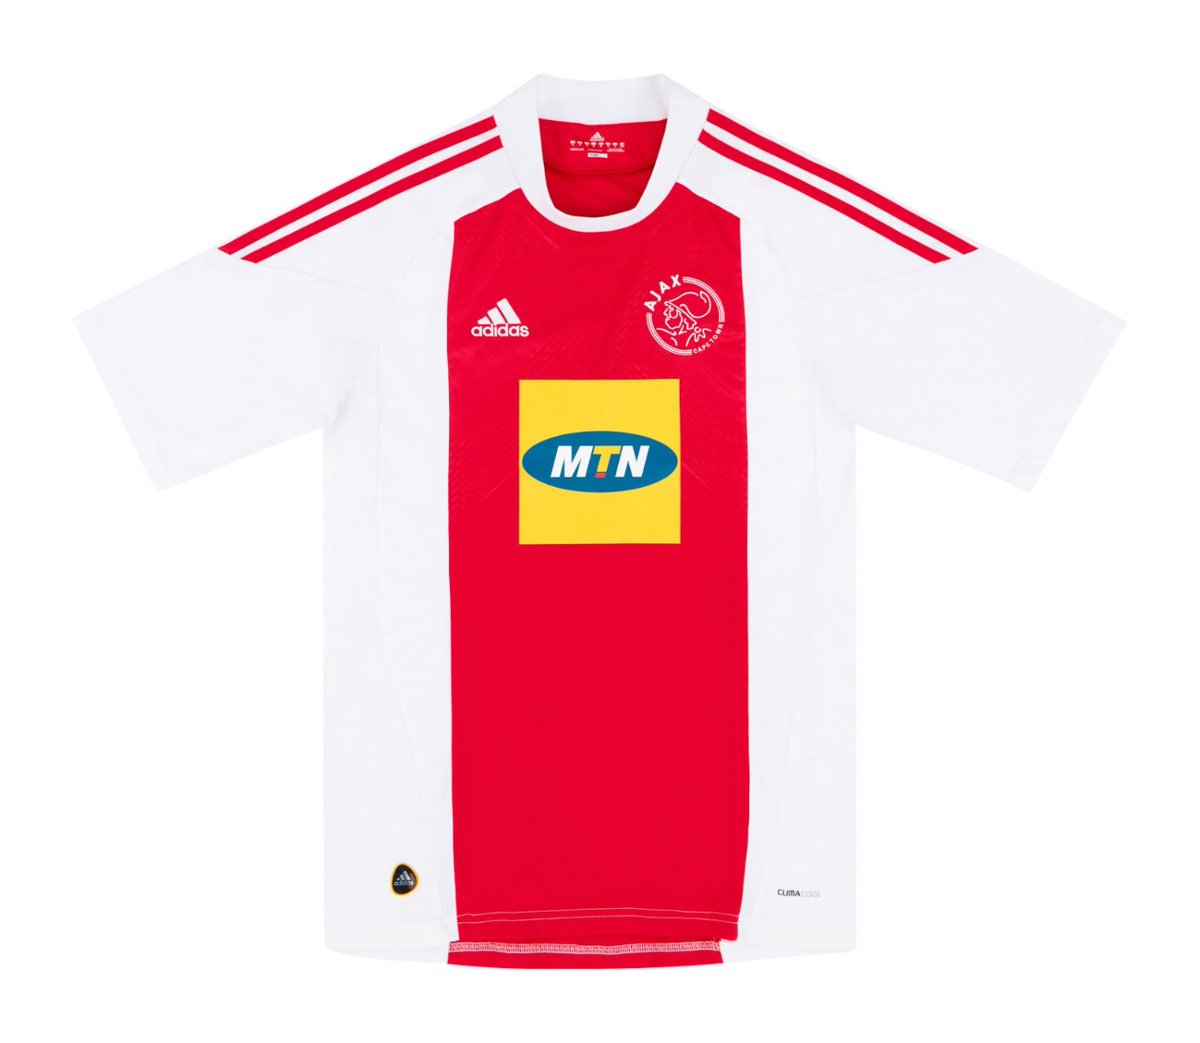 iDiski Times on Twitter: "Who's the first player that comes to mind when  you see this Ajax Cape Town shirt? 🤔 https://t.co/1Oqg2eNFYd" / X